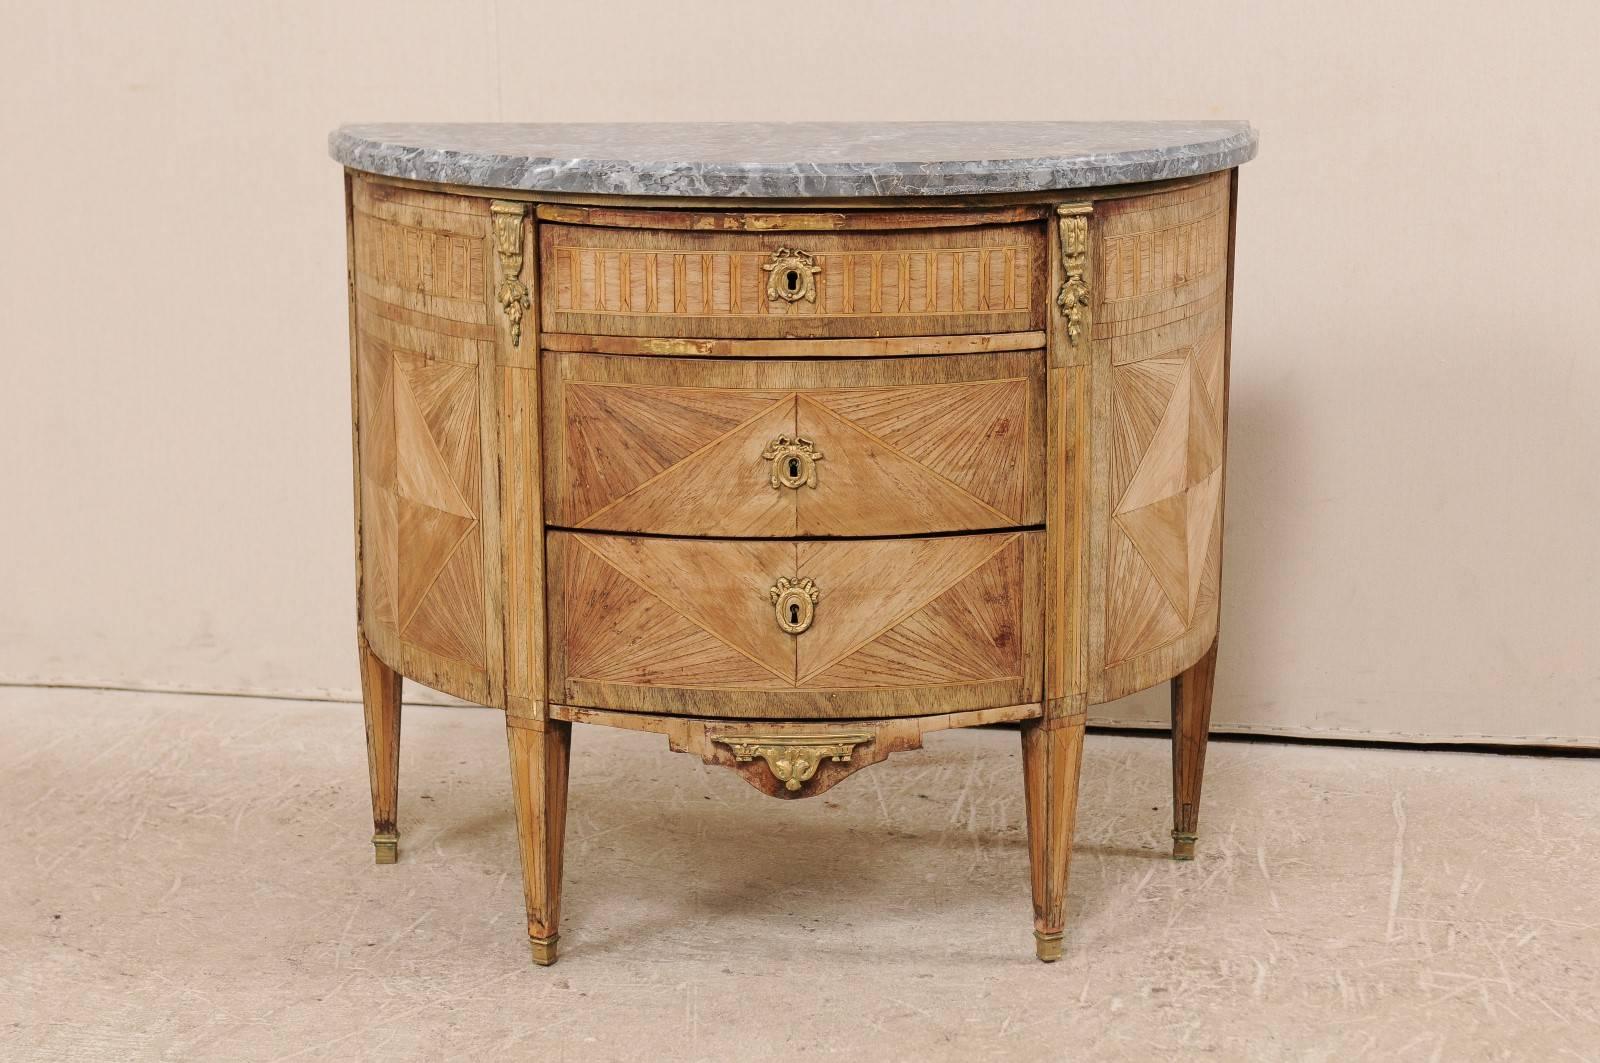 A French 19th century, demilune chest with honed marble top. This antique French three-drawer chest features beautiful marquetry details throughout the natural wood body with a honed marble top. The marquetry details lend themselves to a series of